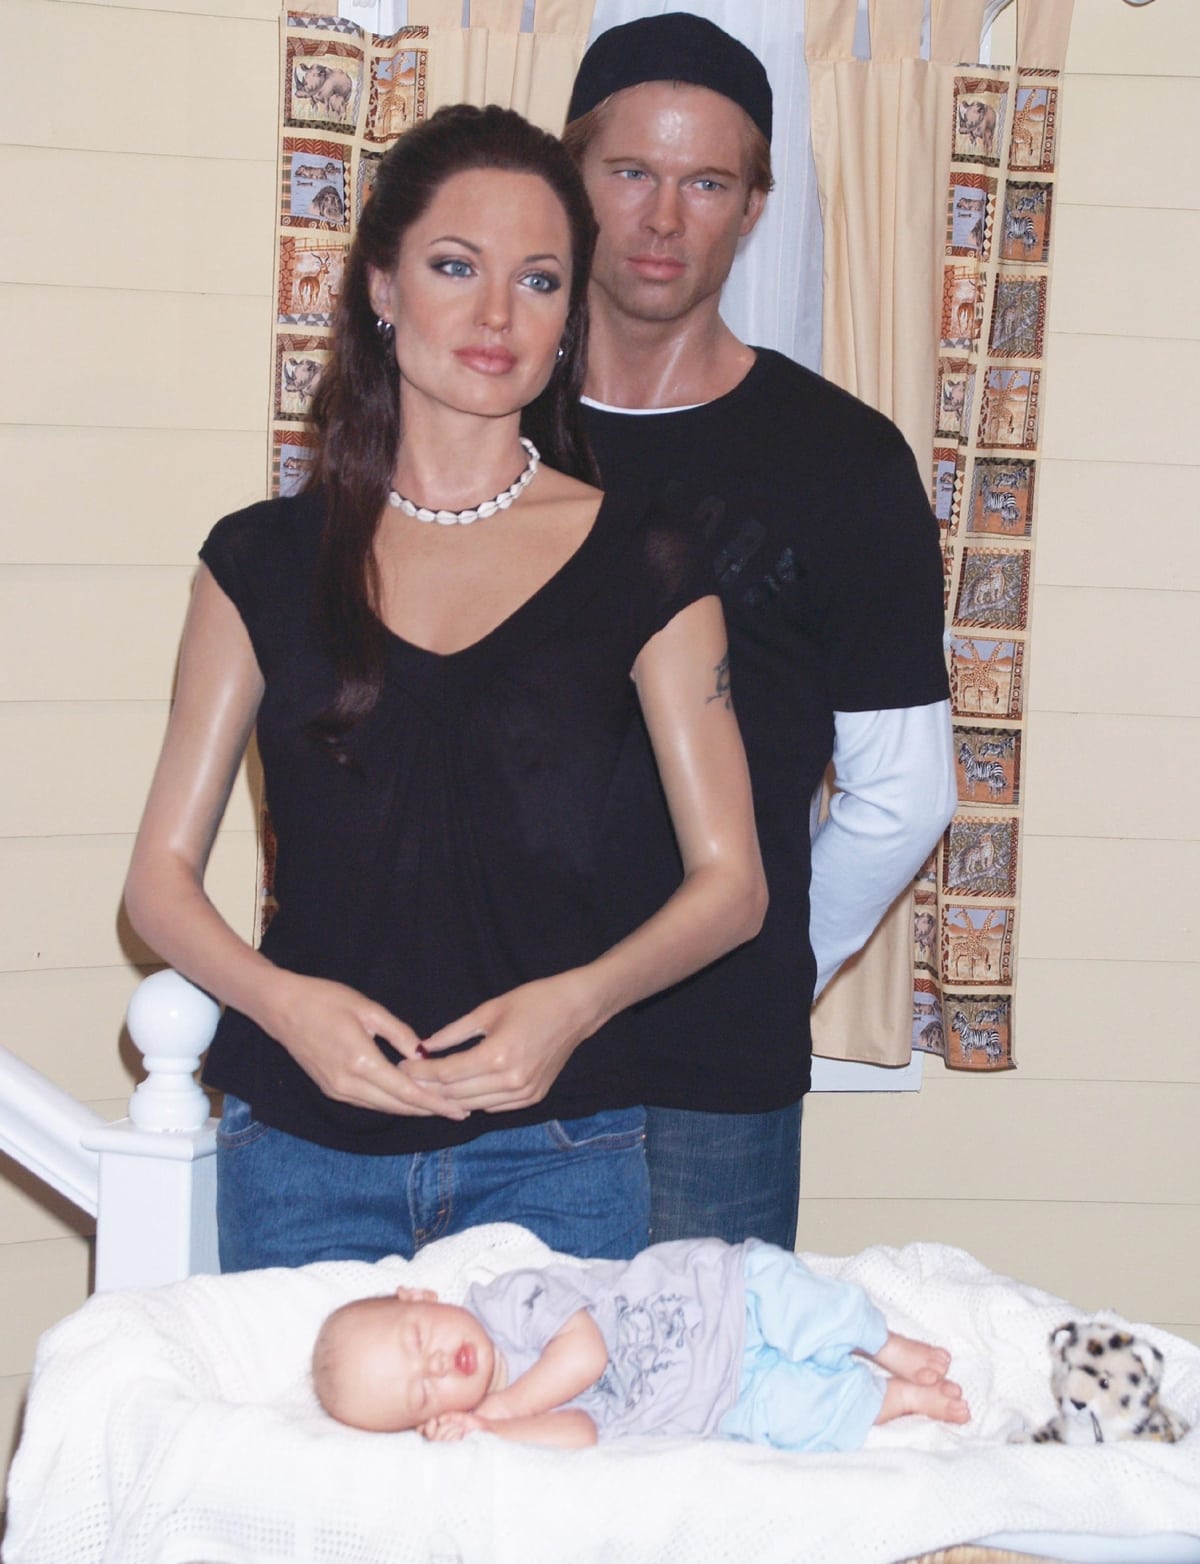 The African-themed Shiloh exhibit at Madame Tussauds Wax Museum shows Shiloh Jolie-Pitt sleeping, while her parents, Angelina Jolie and Brad Pitt, watch over her